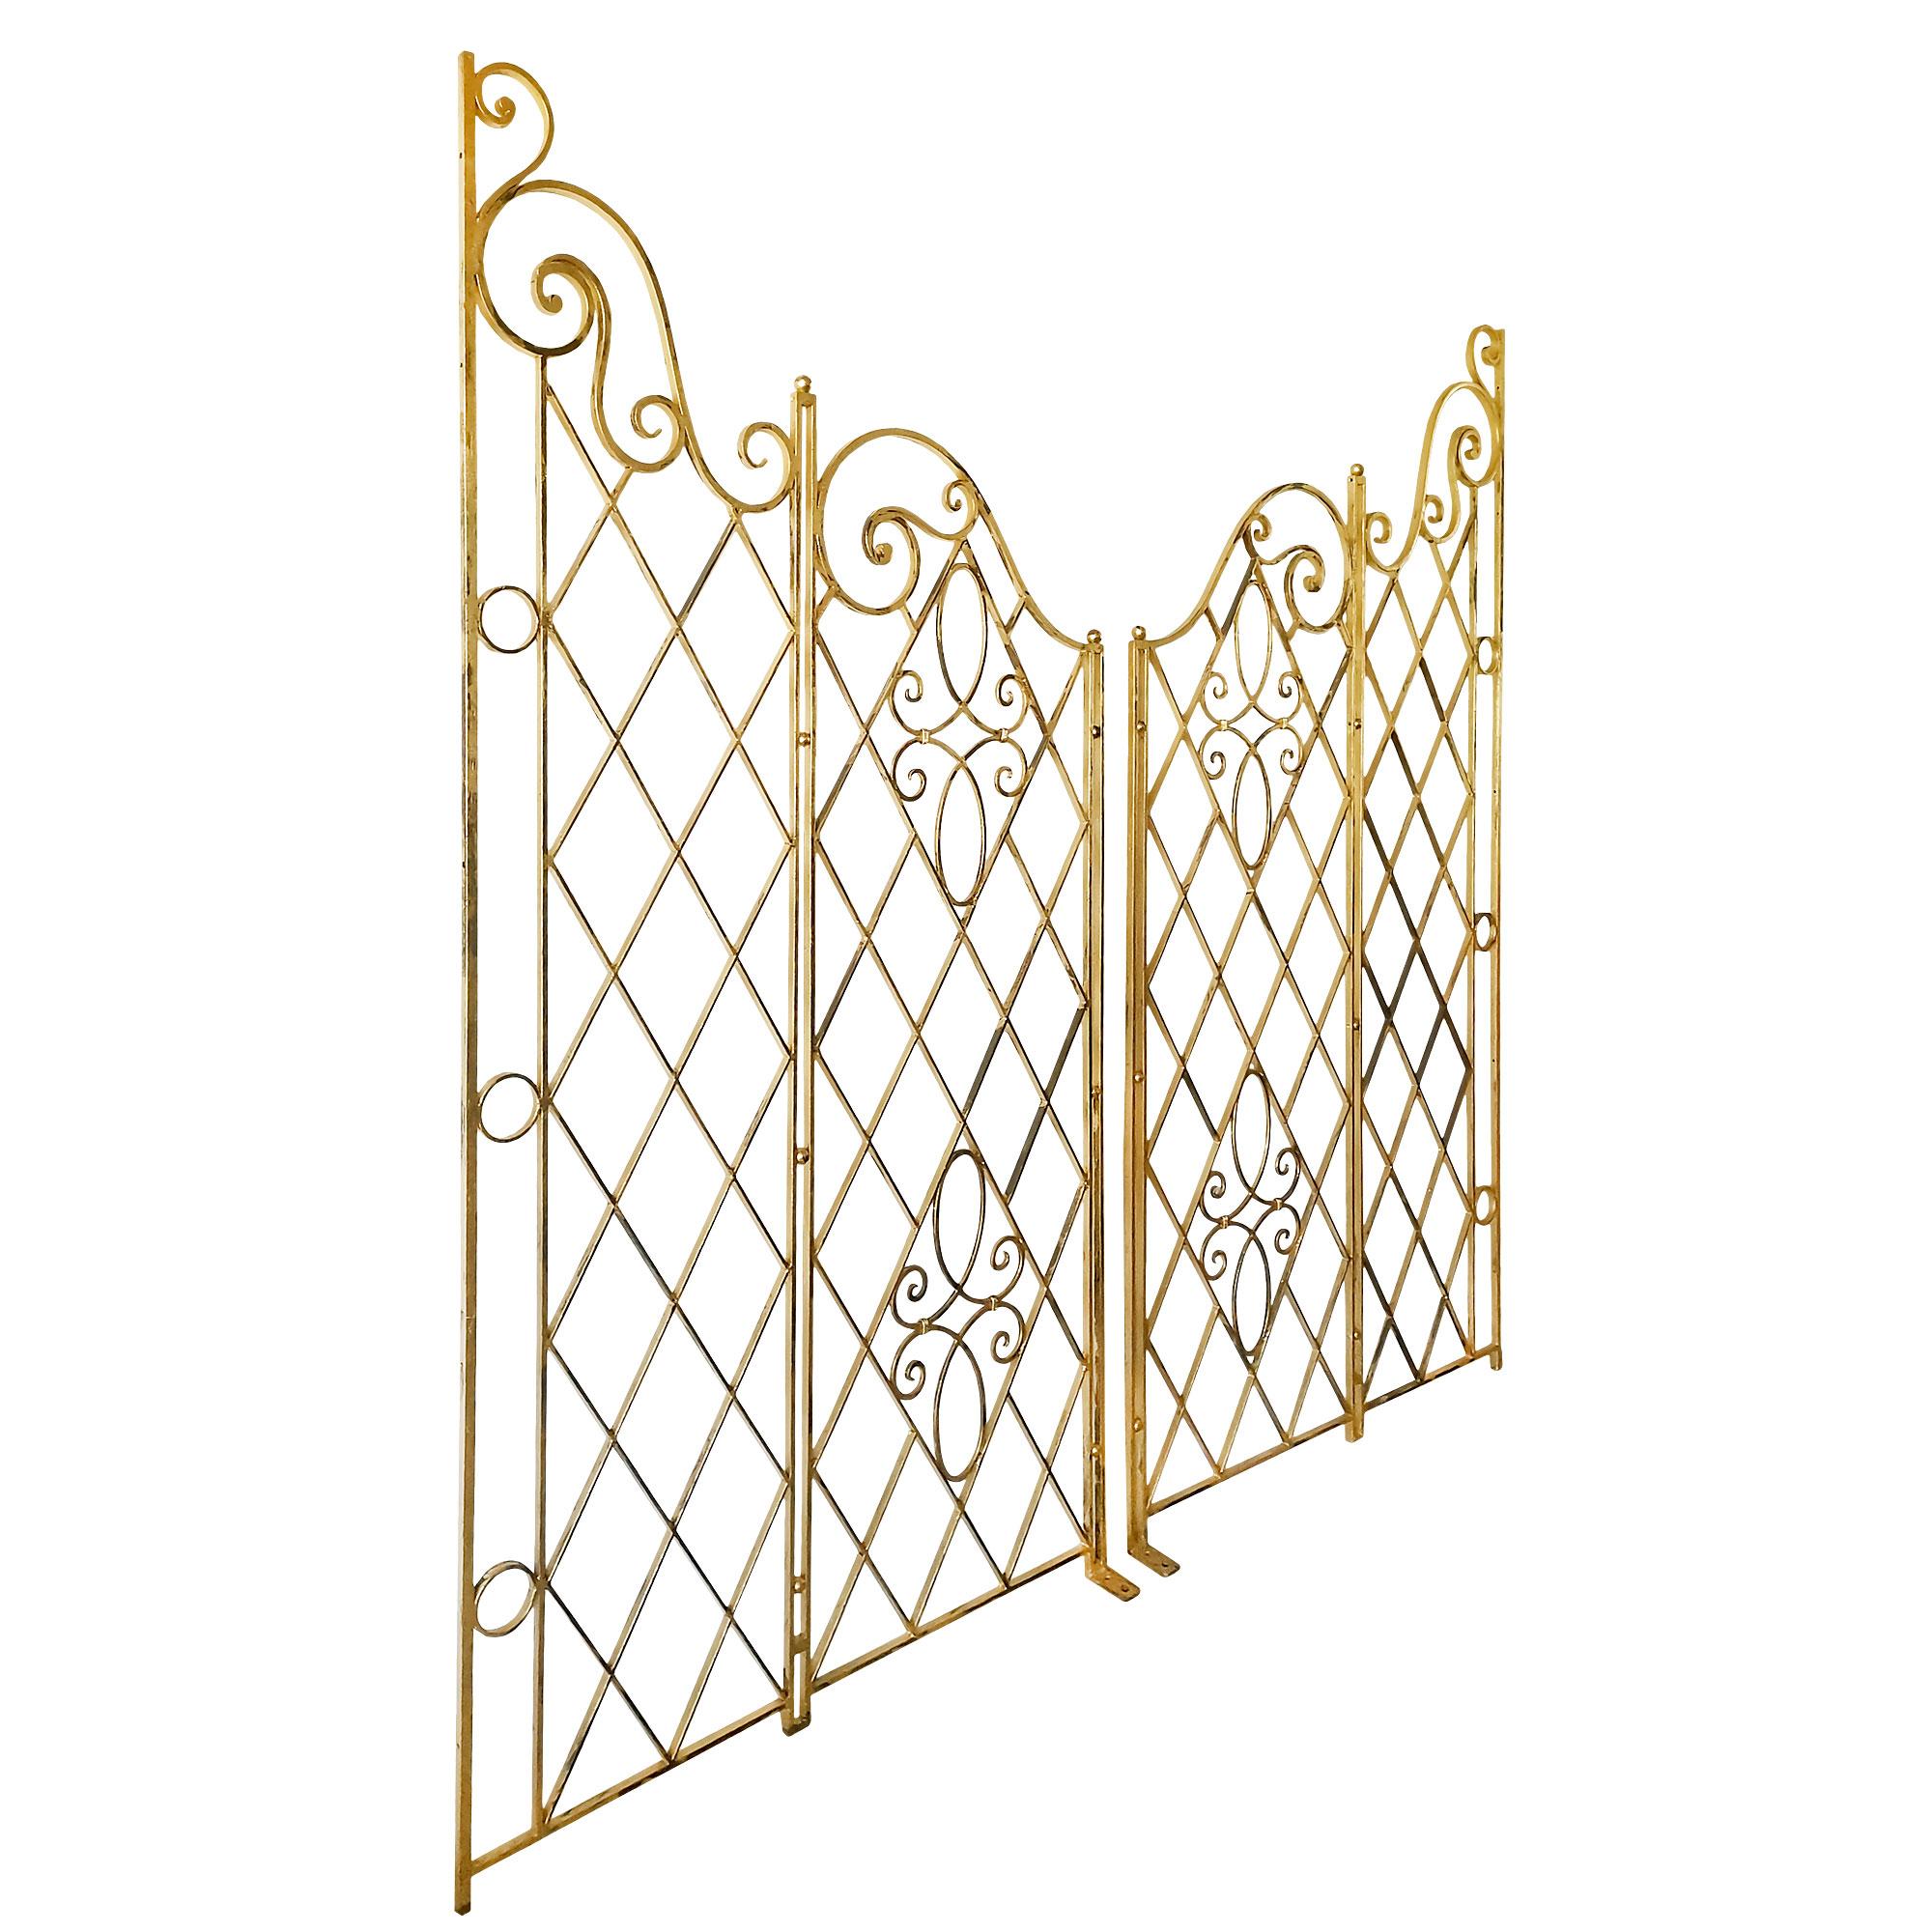 Pair of neoclassical apartment separation grilles in wrought iron with an old patina of gold leaf. Fixing points on the highest upright. Double sided. Very nice quality.
France c. 1940.

Dimensions (each)
cm: 105 x 1,5 x 142,5 (min.) – 200